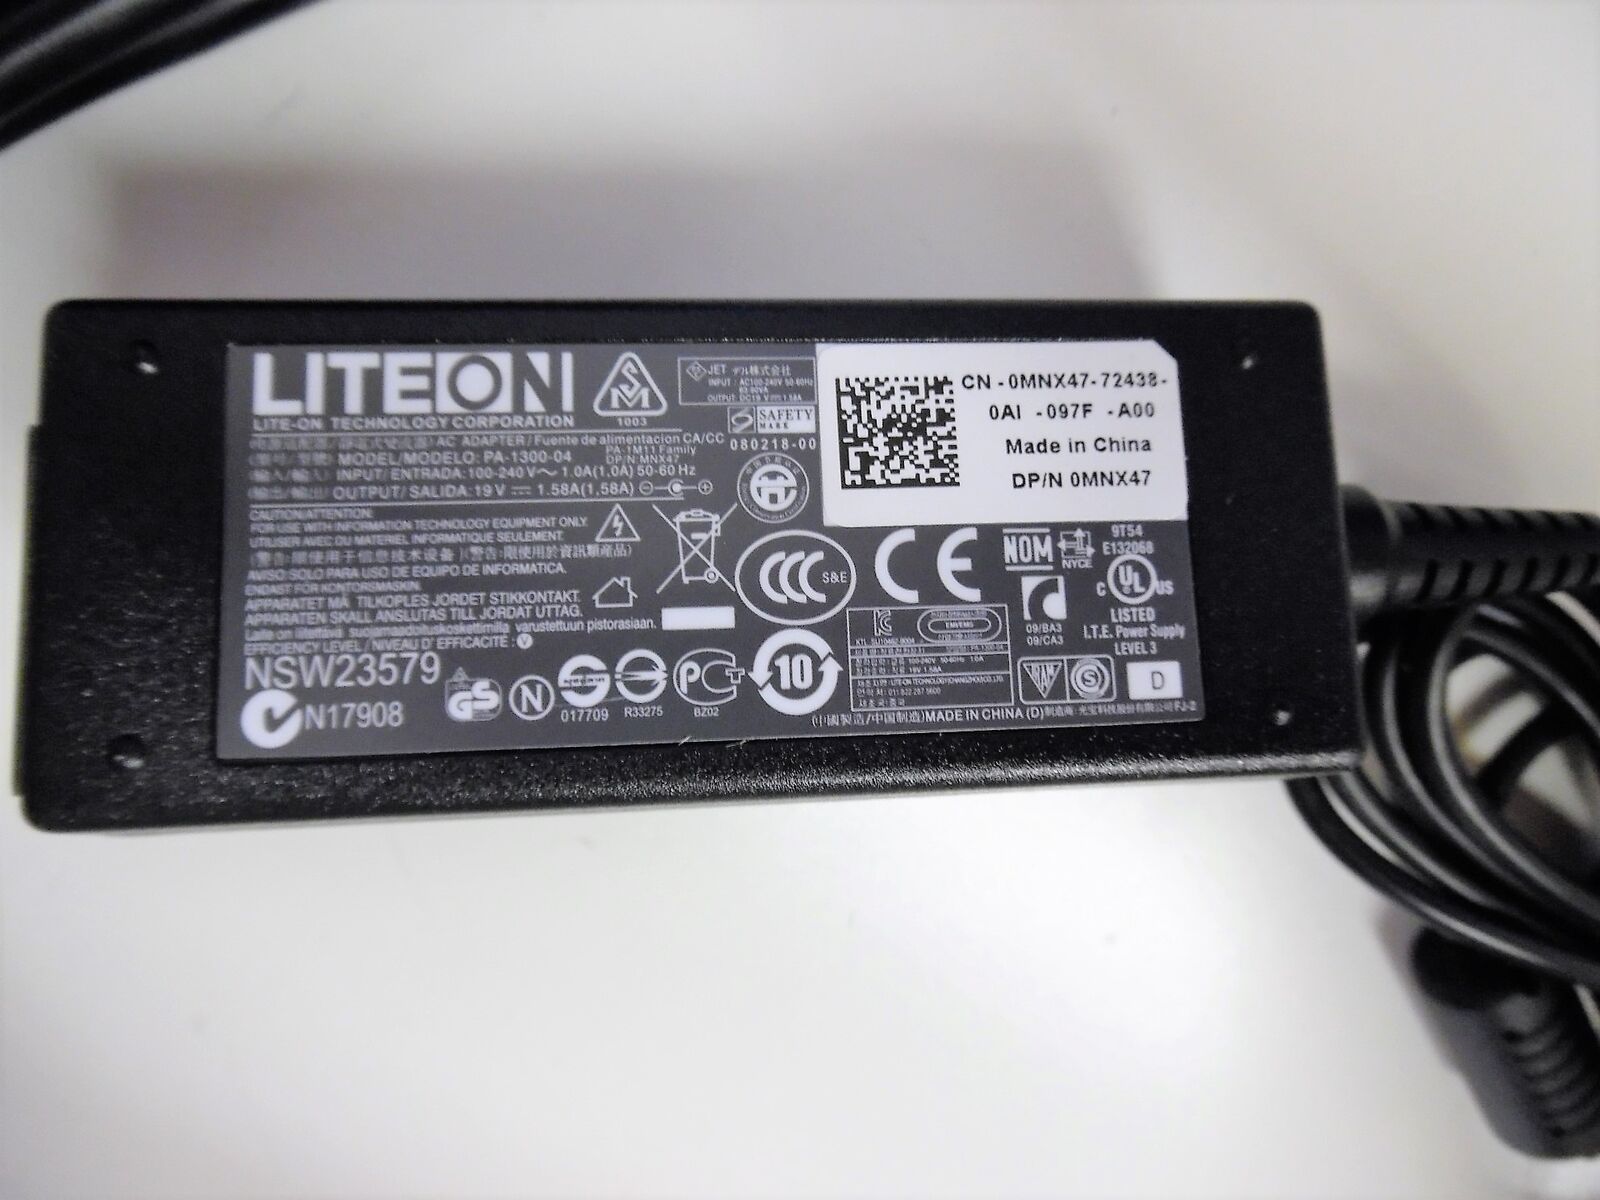 5 X Dell LiteOn Laptop AC Adapter Charger PA-1300-04 30W 19V 1.58A MNX47 ADP340